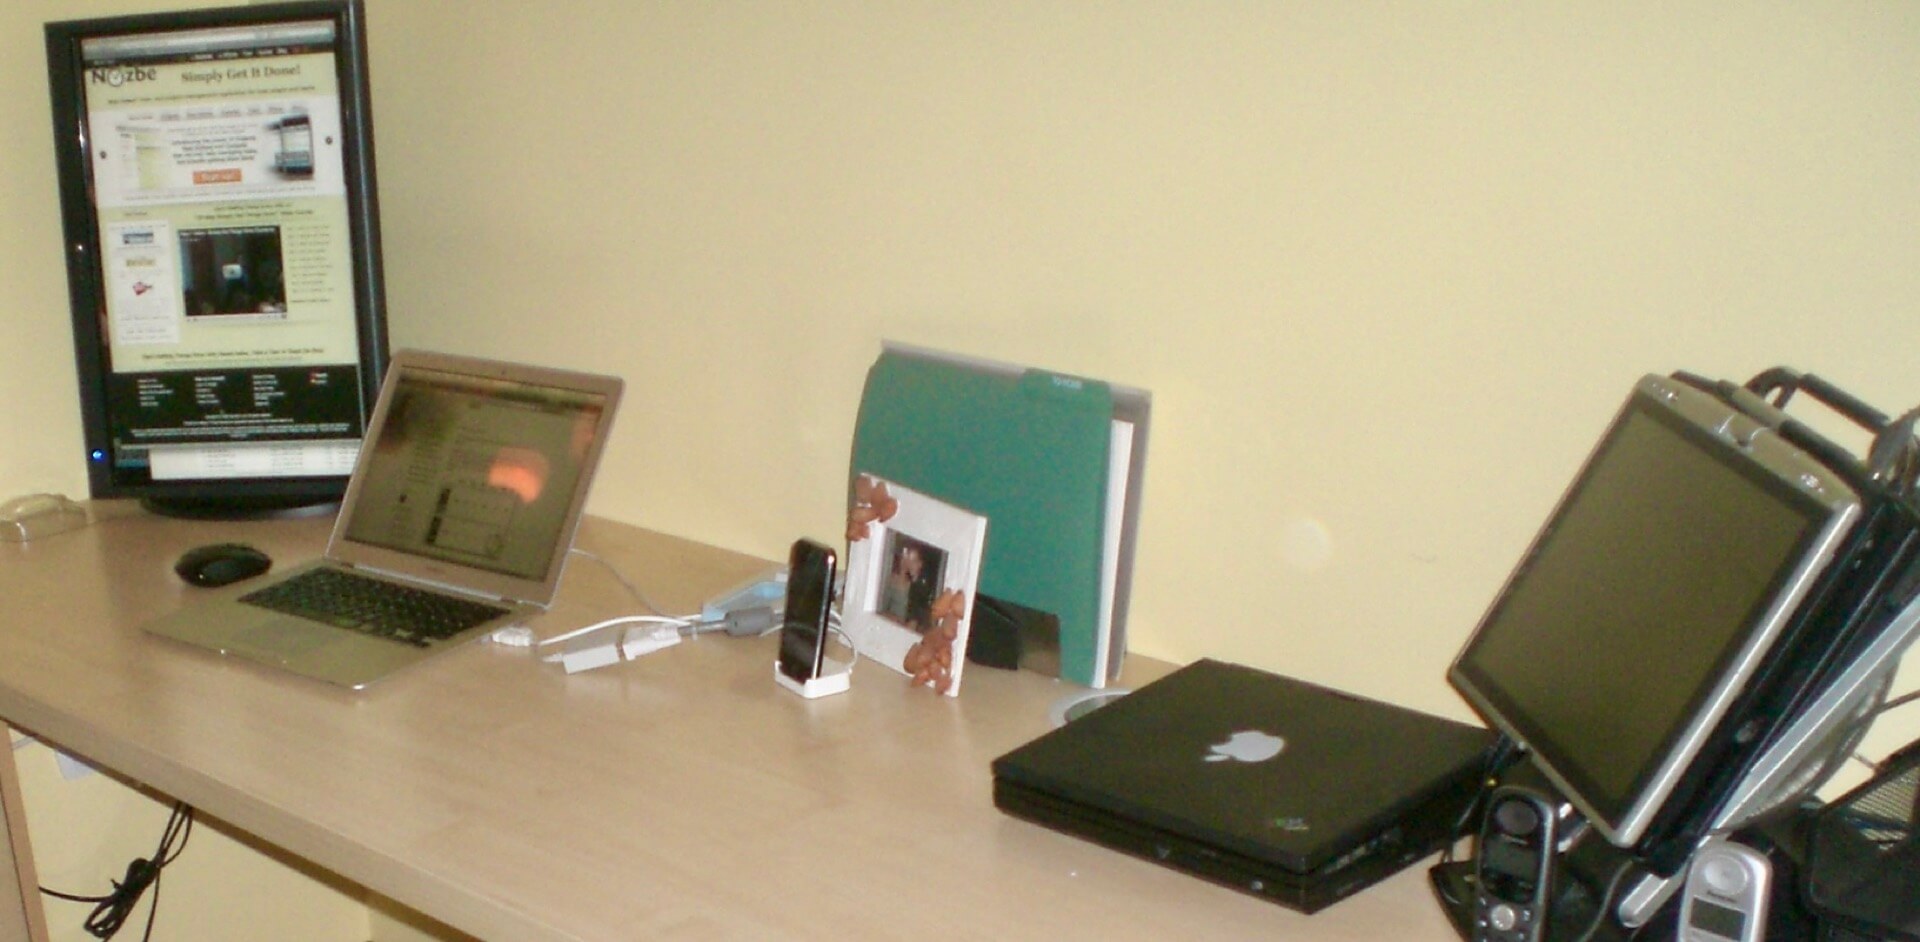 History of my 10 laptops - from 2000 and Compaq, Fujitsu, Toshiba, ThinkPad through 2008 with Apple MacBooks until now! office09